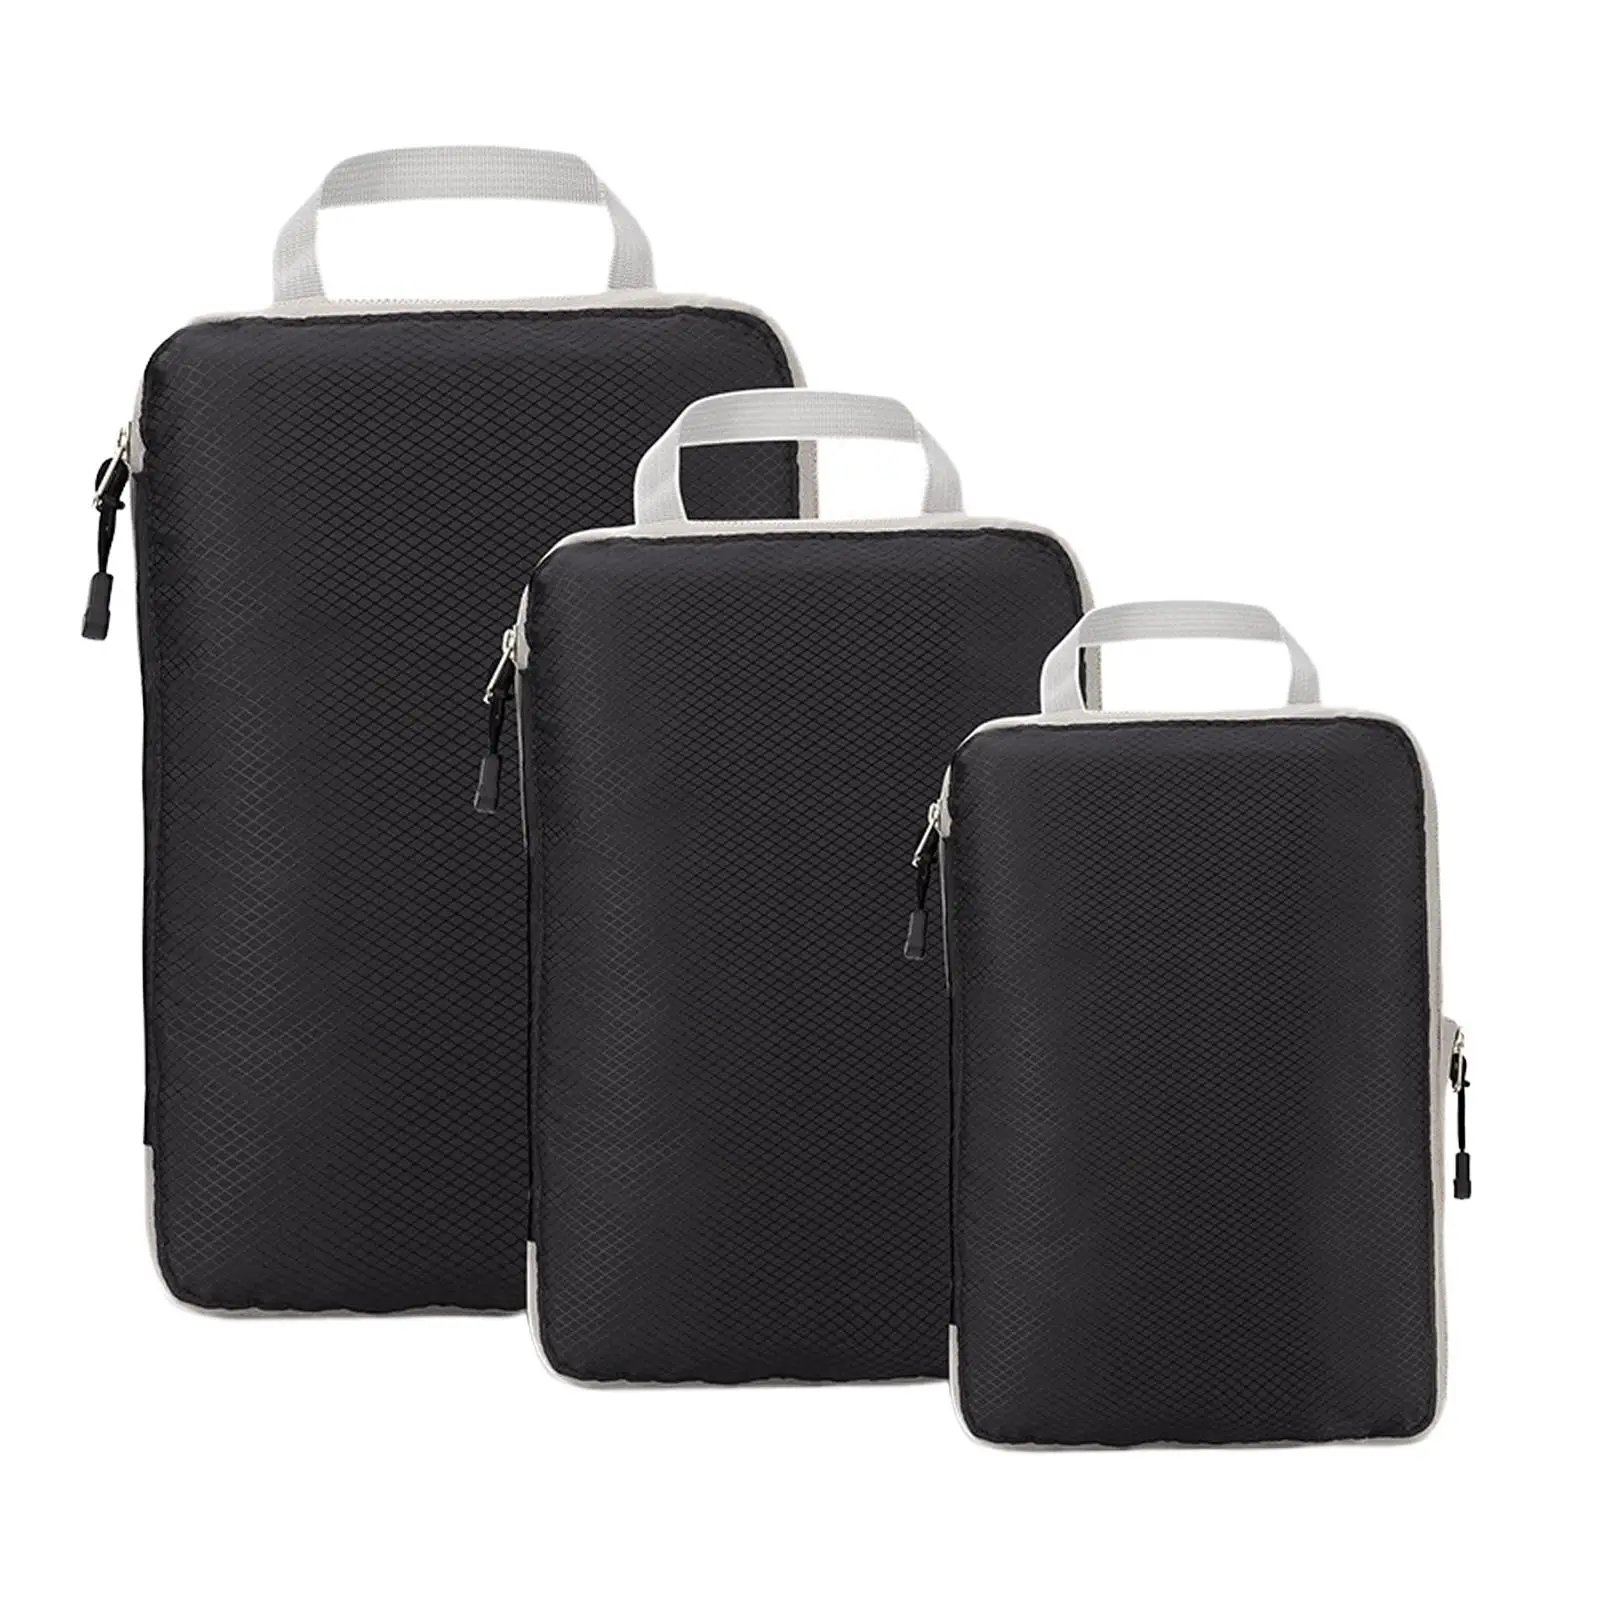 3x Travel Compressible Packing Cubes Men Women Portable Packing Bags Set